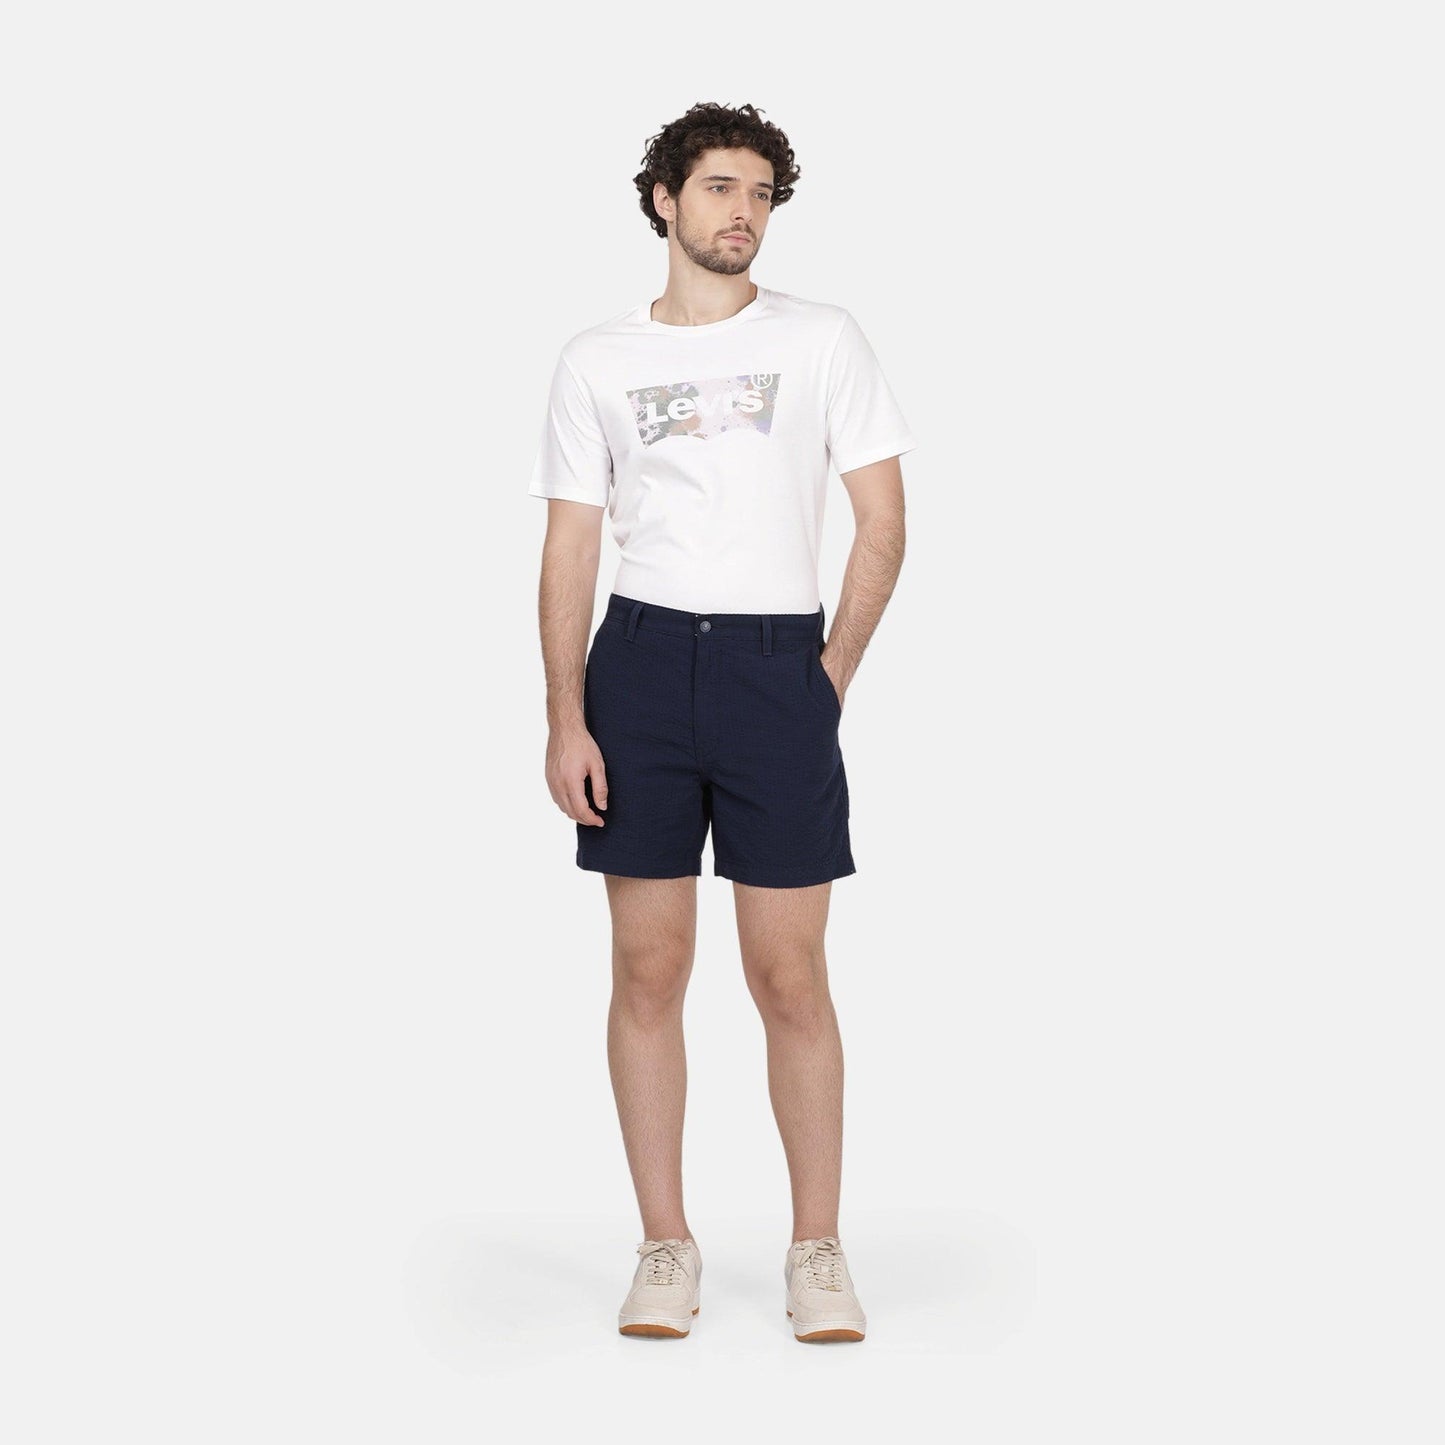 XX CHINO AUTHENTIC 6" SHORTS - BLUE